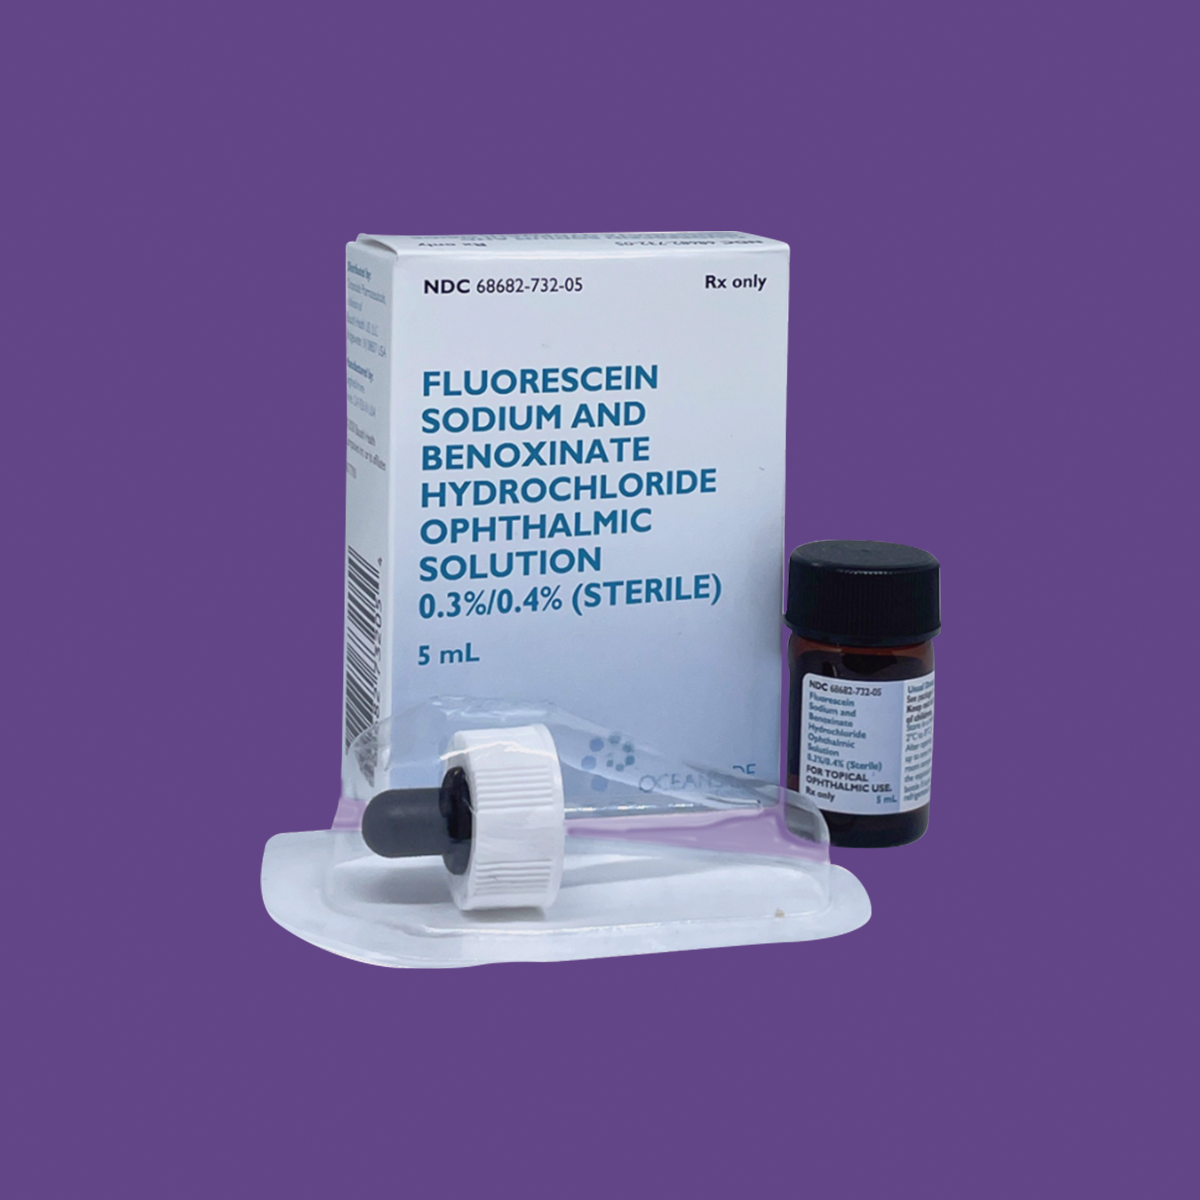 Fluorescein Sodium 0.3% and Benoxinate Hydrochloride (5mL) Cold Ship Included